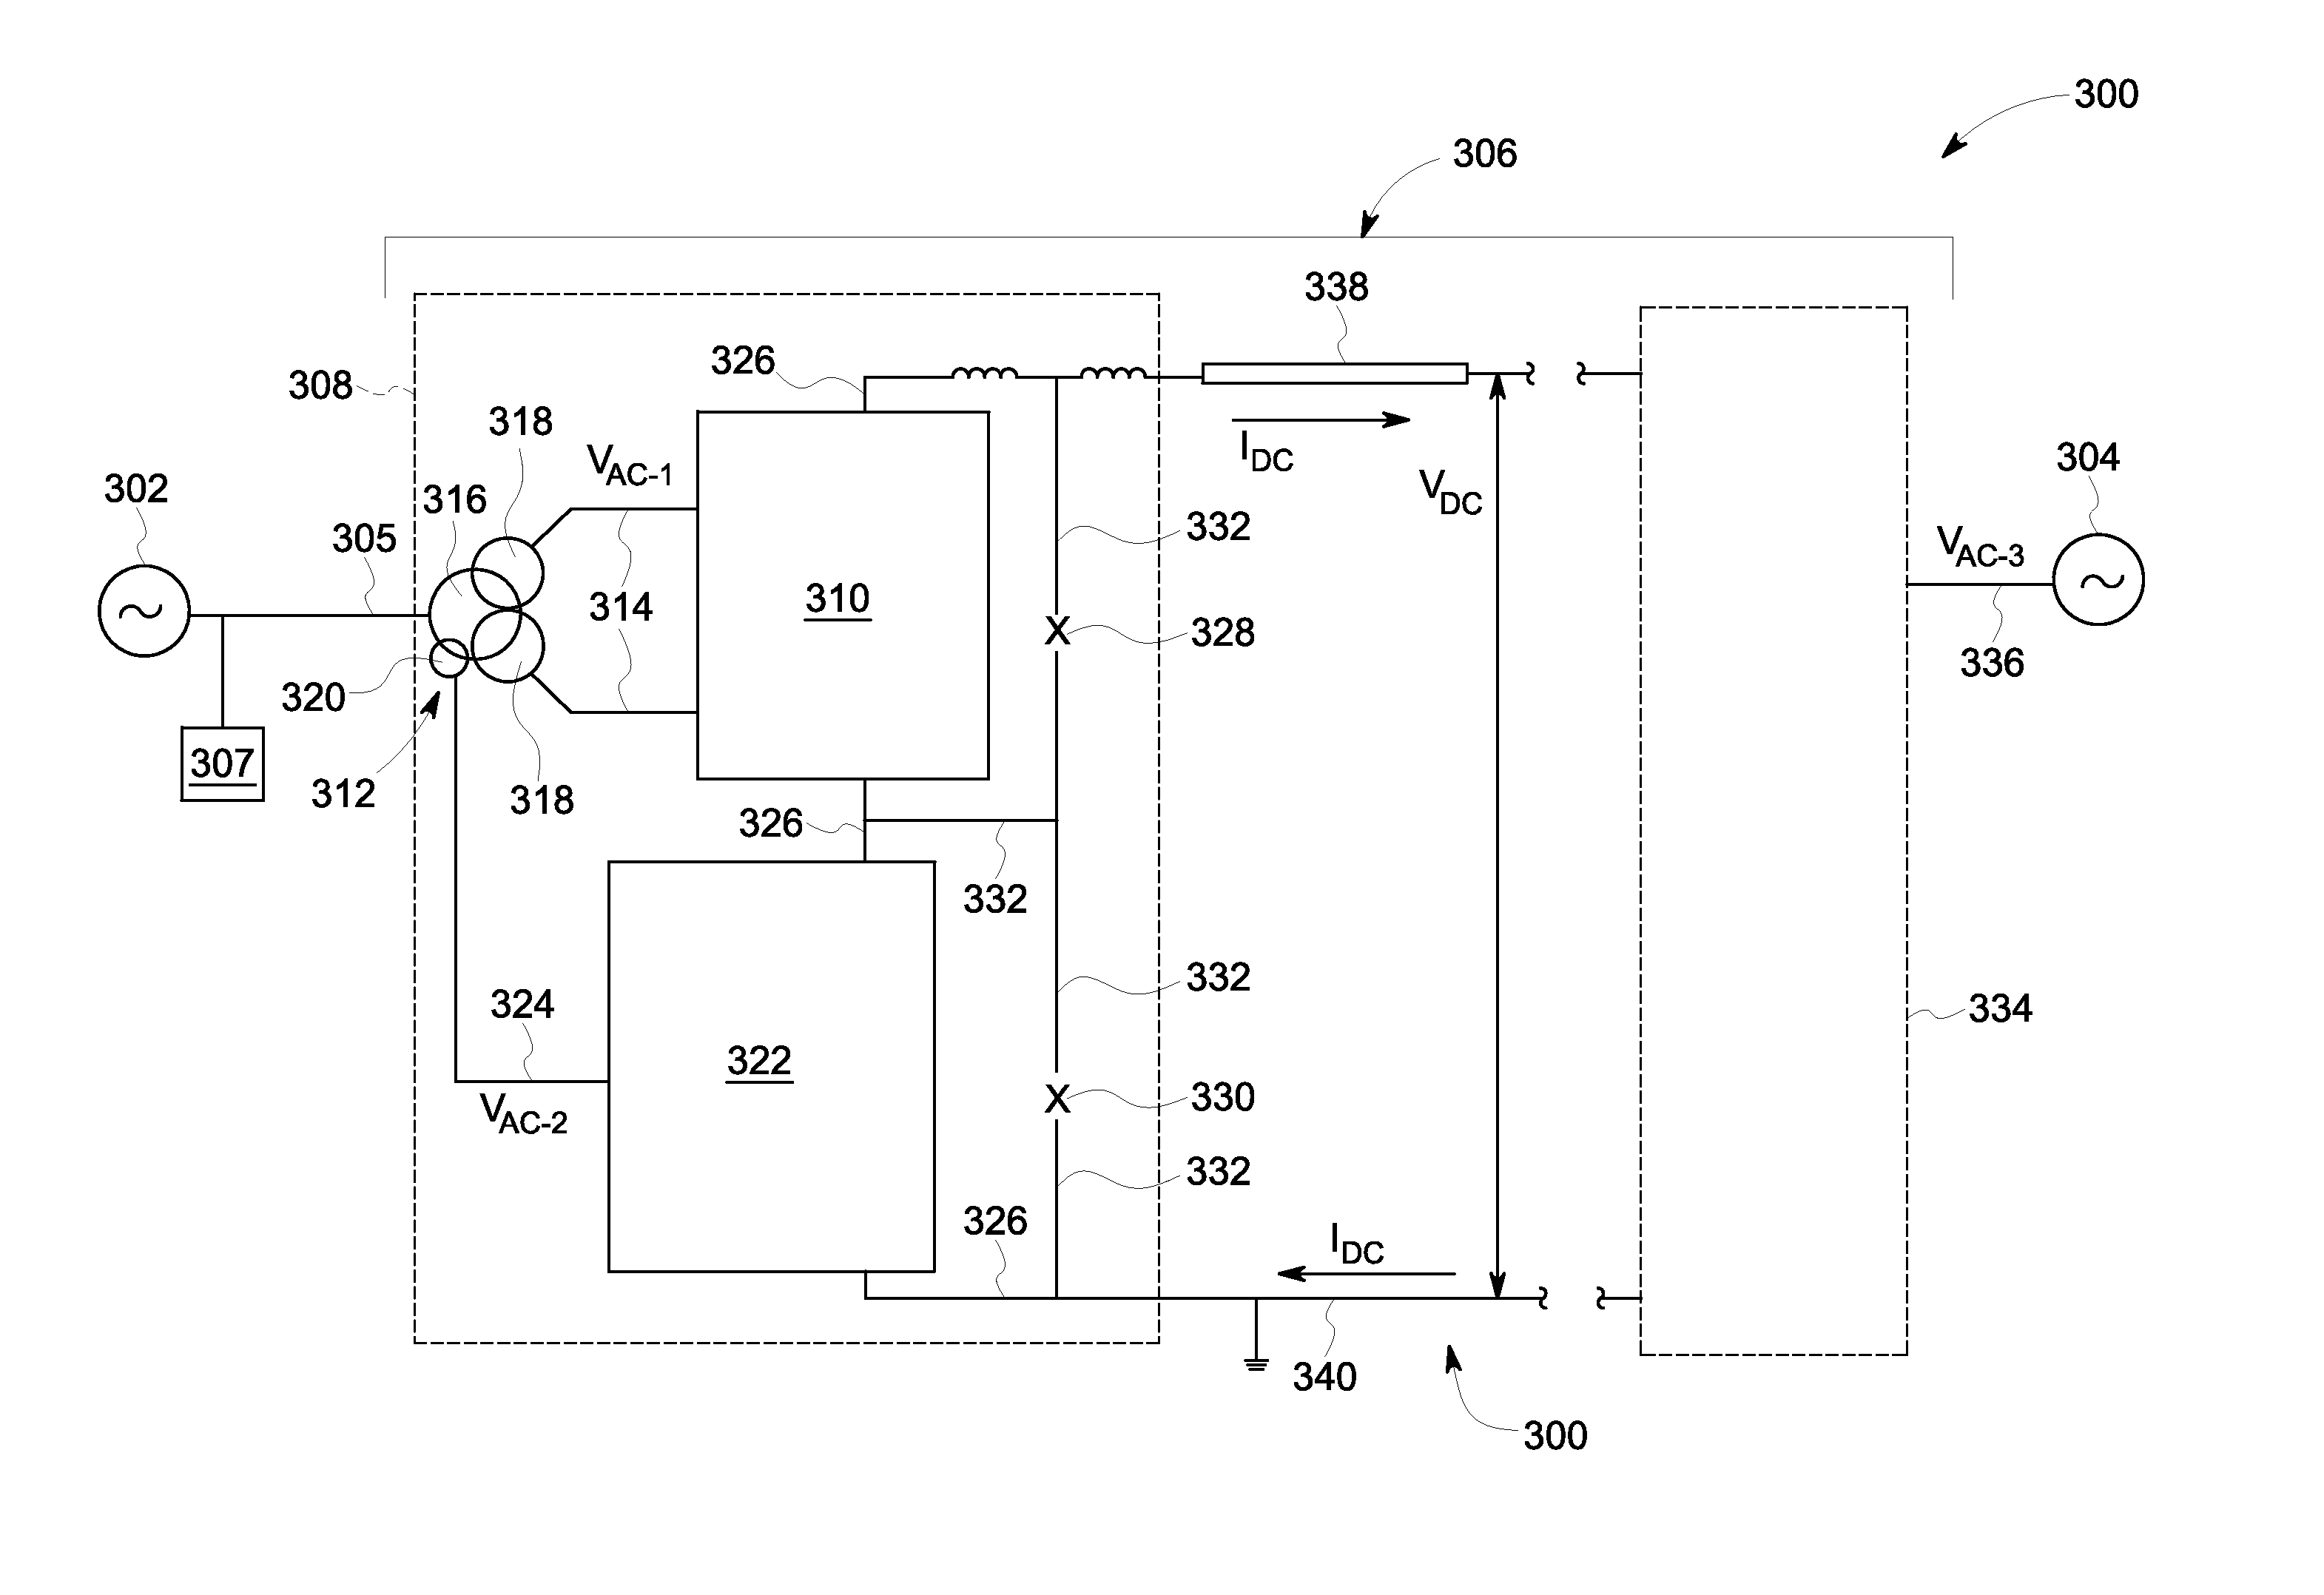 Hybrid high voltage direct current converter systems